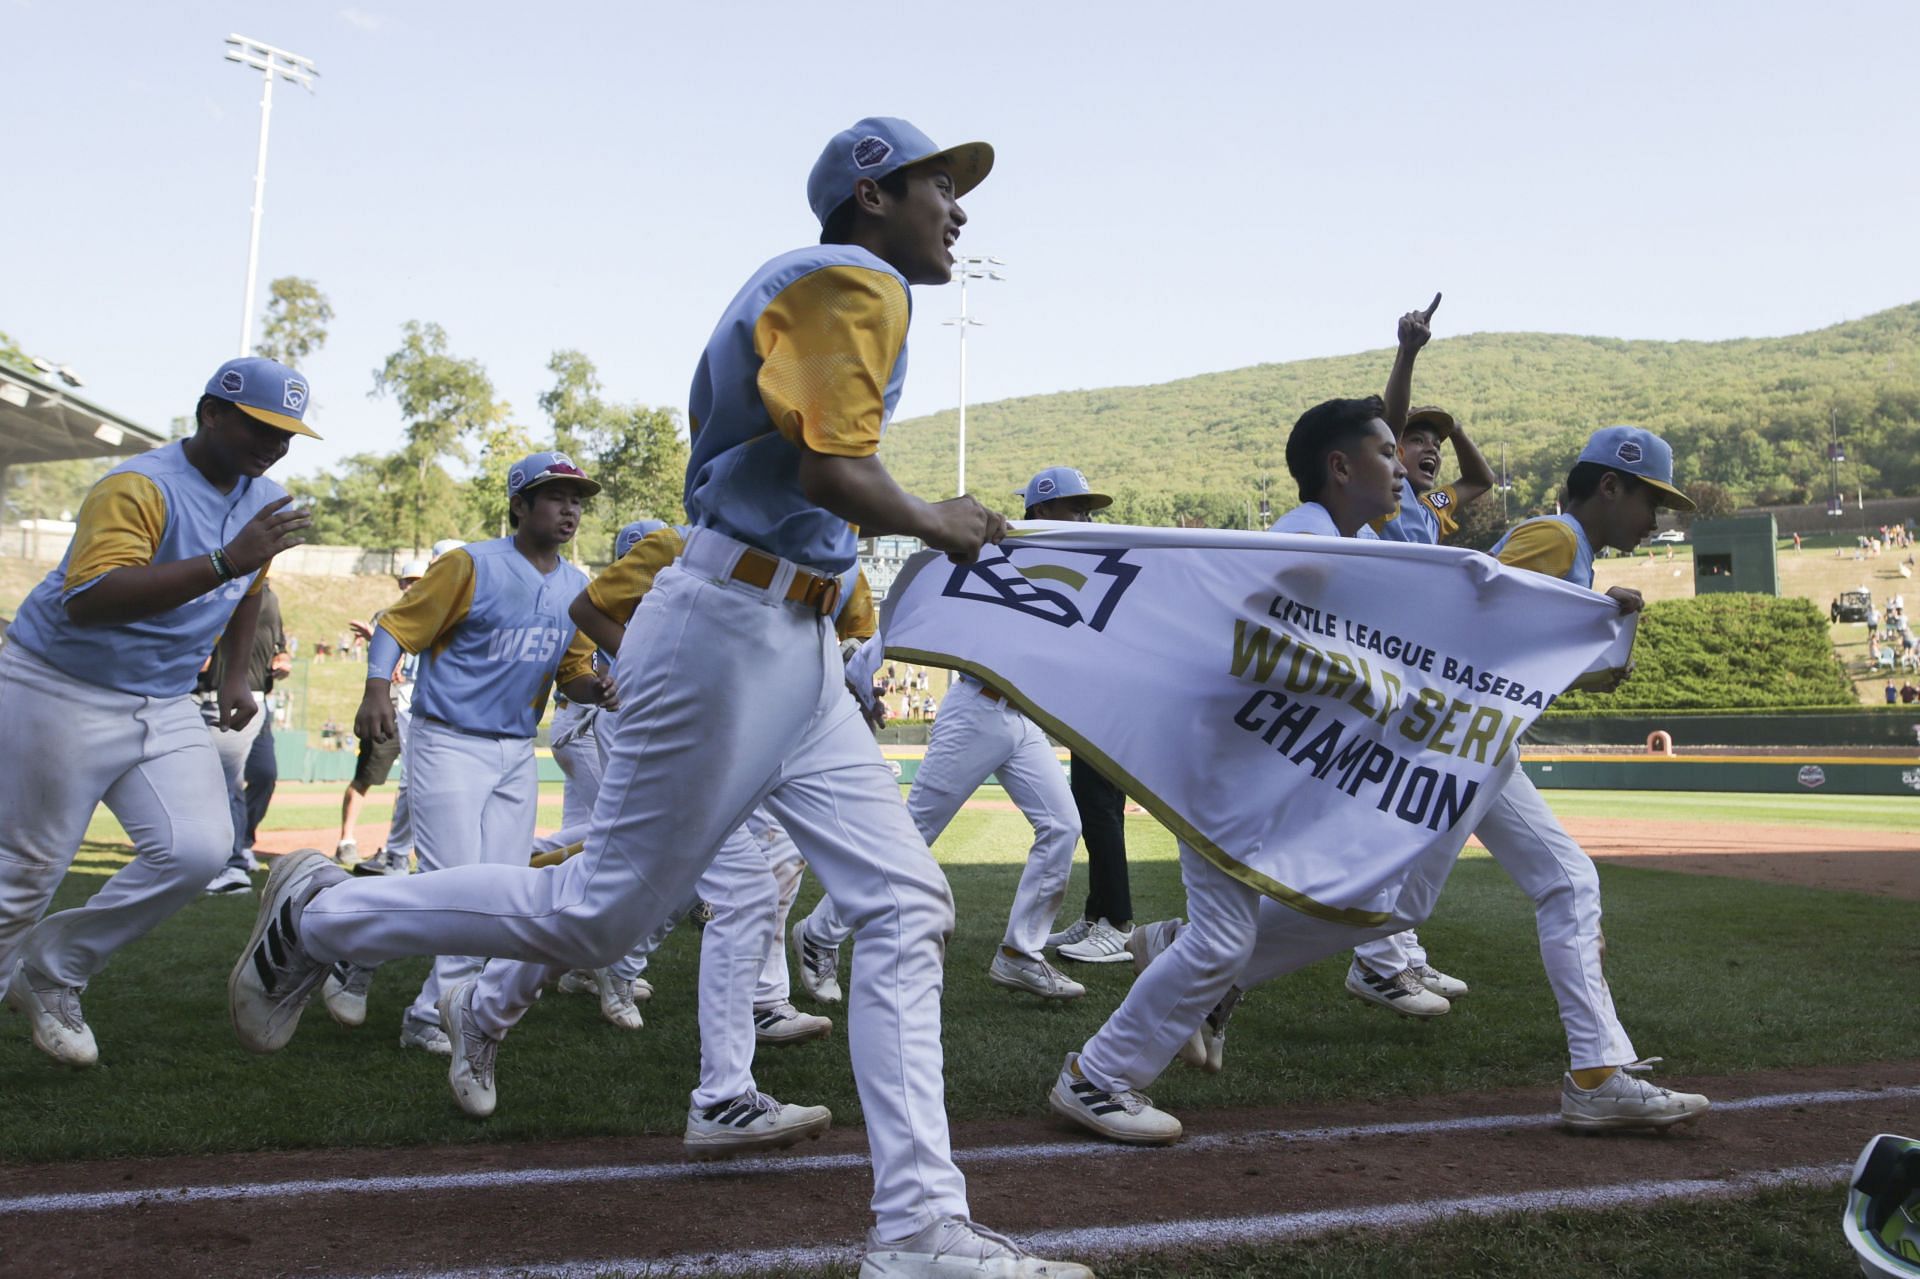 When is the Little League World Series?